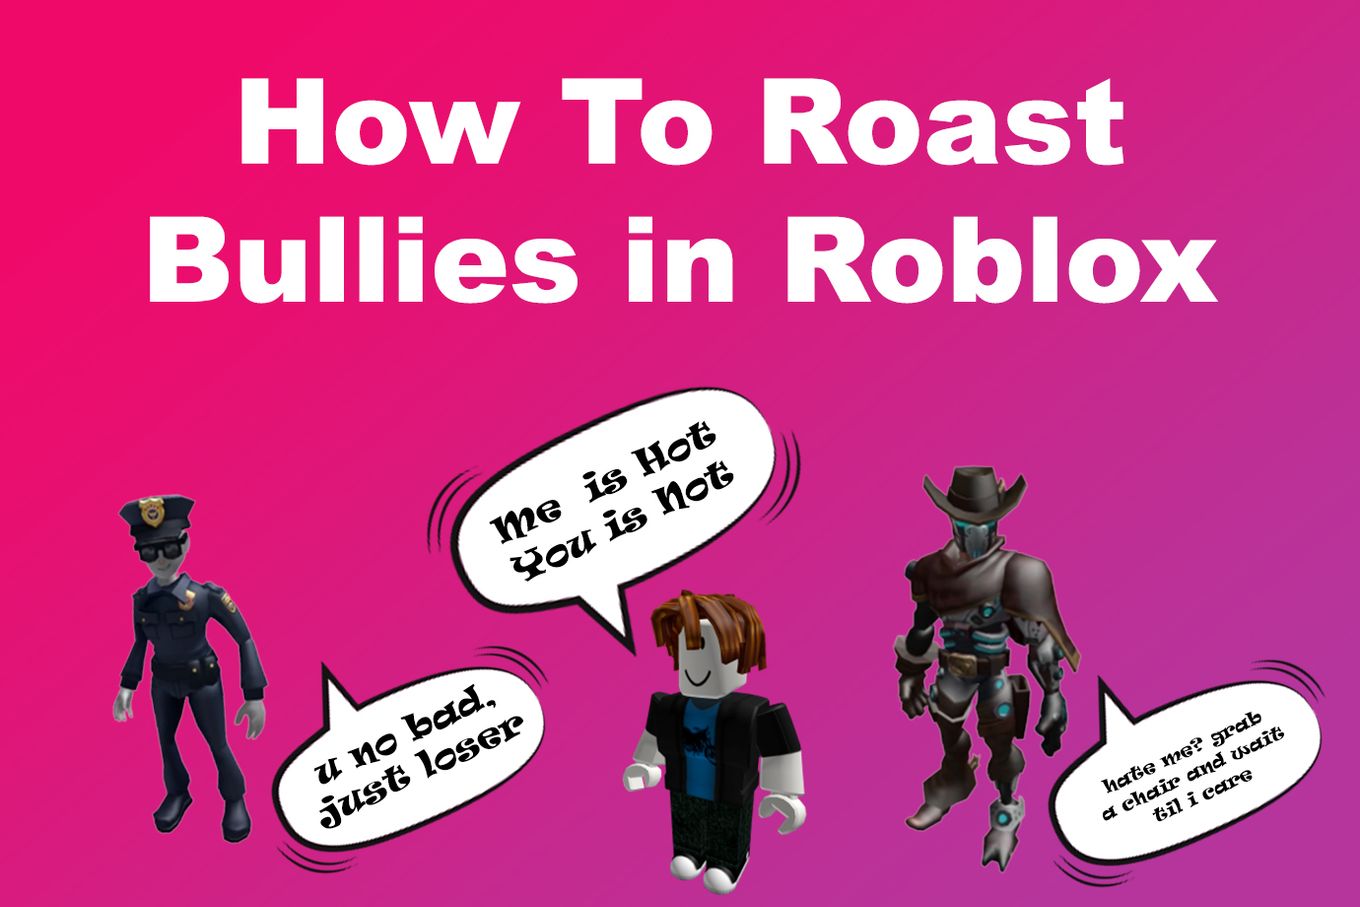 How To Roast Bullies in Roblox